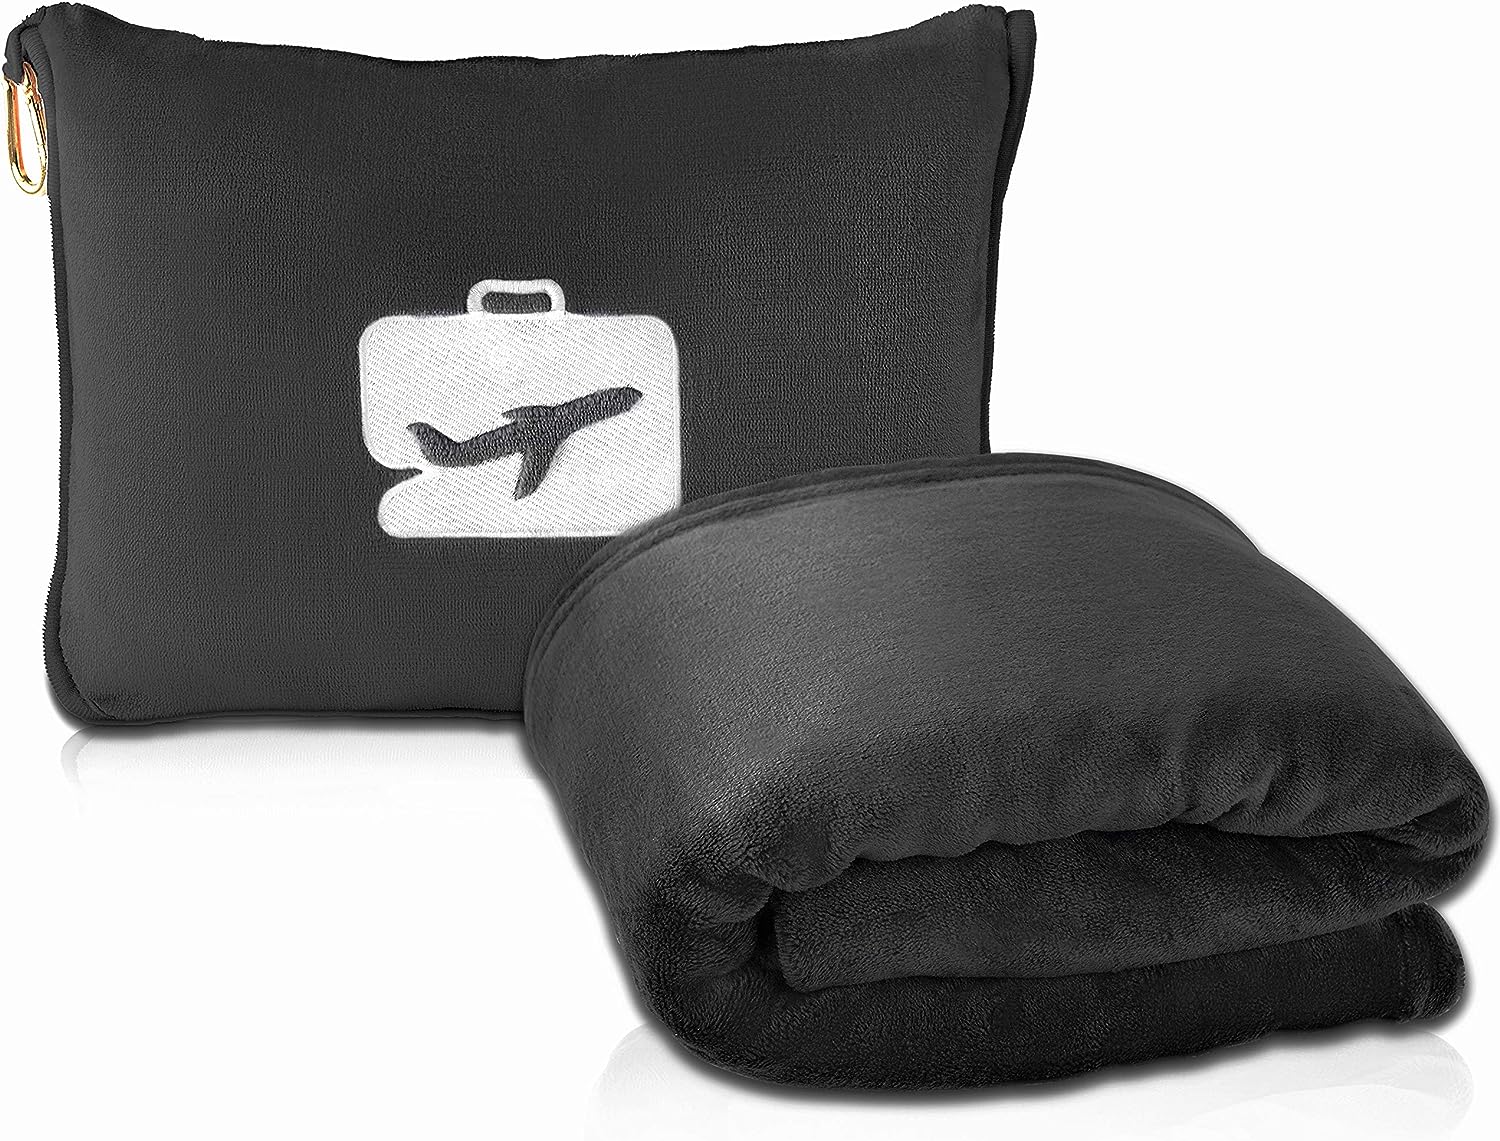 Travel Blanket and Pillow-Power-Bank-The Best Gifts For Travelers